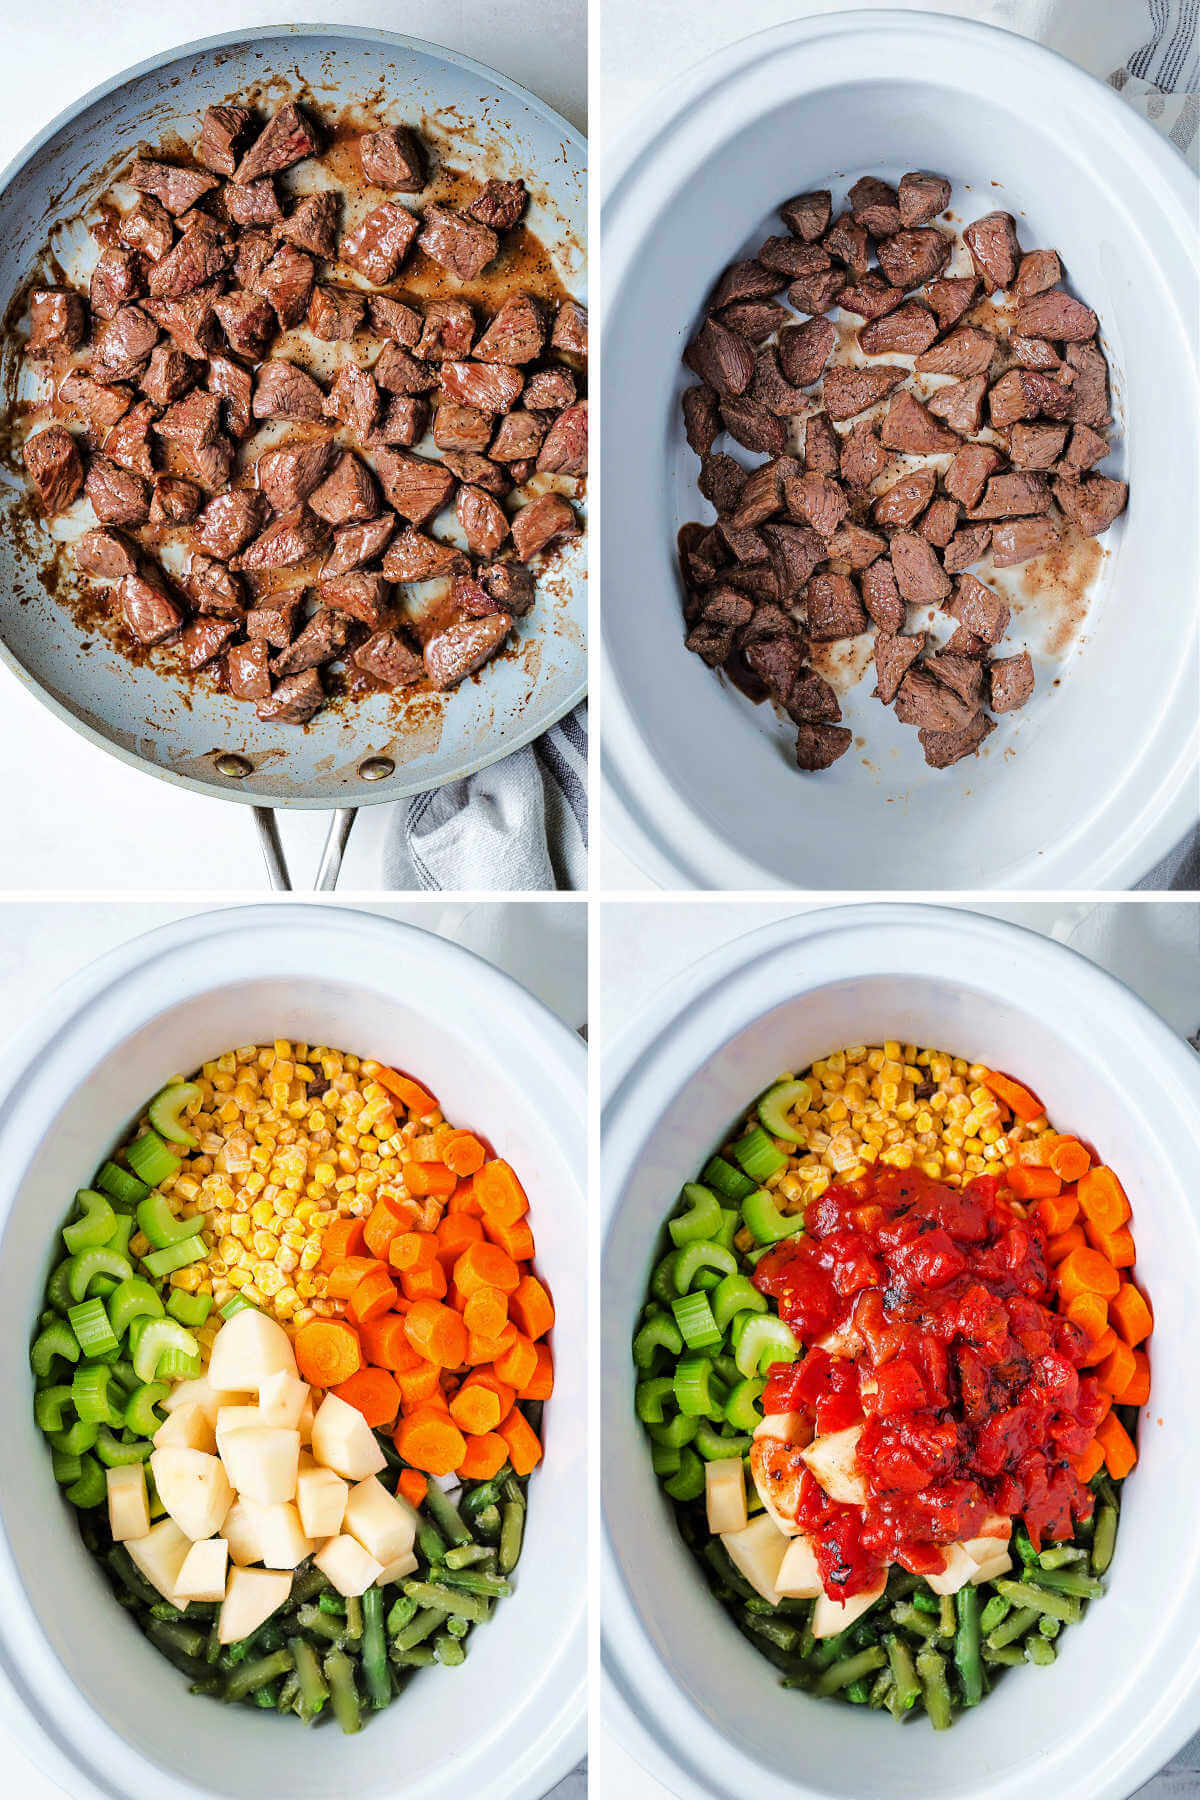 browning beef and layering vegetables in a crockpot for vegetable beef soup.